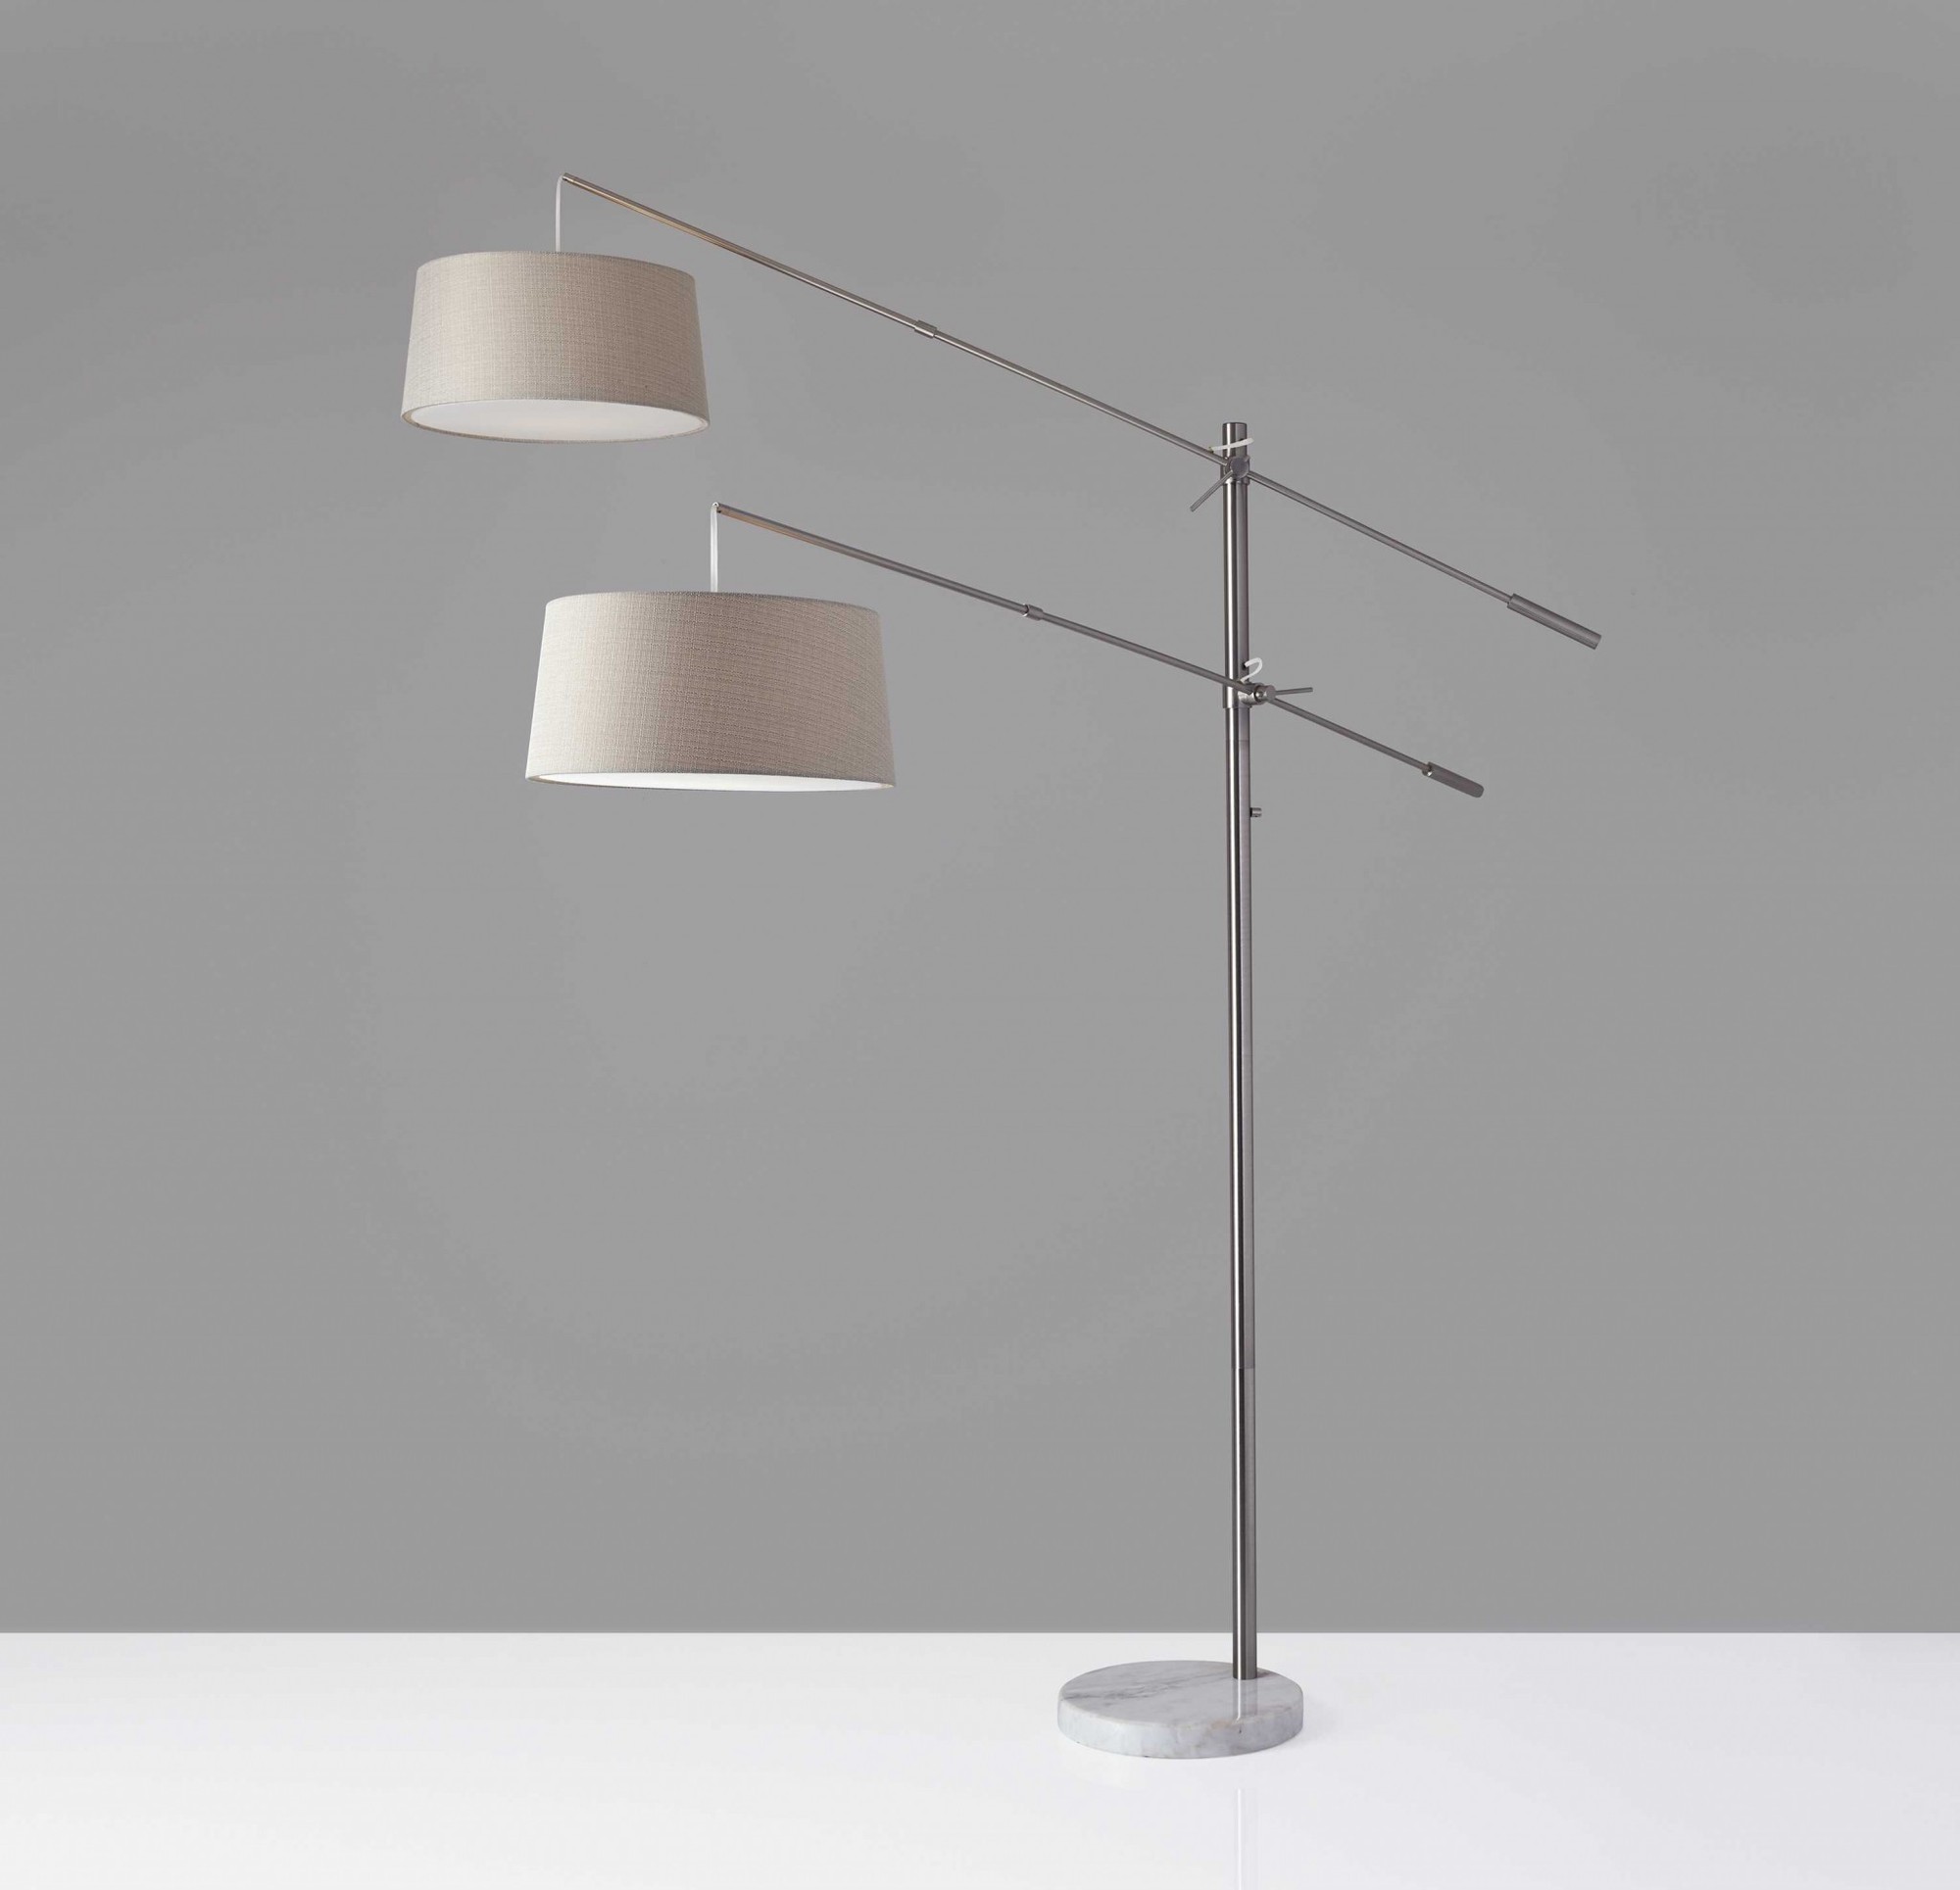 77" X 75" X 78-102" Brushed Steel Metal Two-Arm Arc Lamp